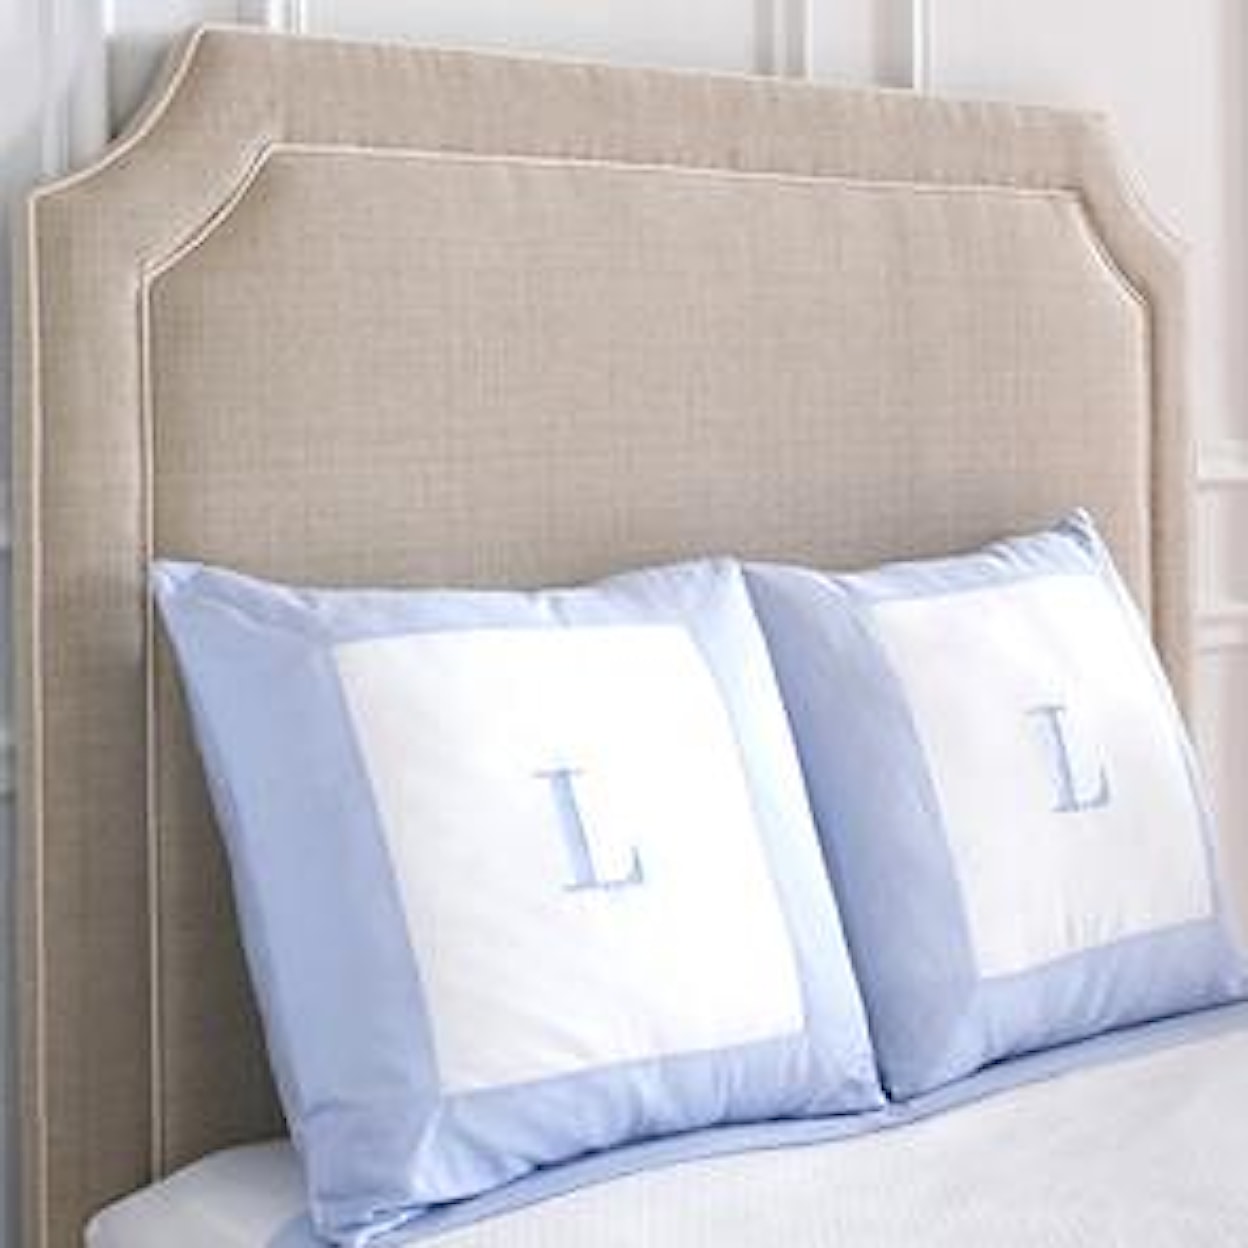 Libby Langdon for Braxton Culler Libby Langdon Cooper Twin Headboard